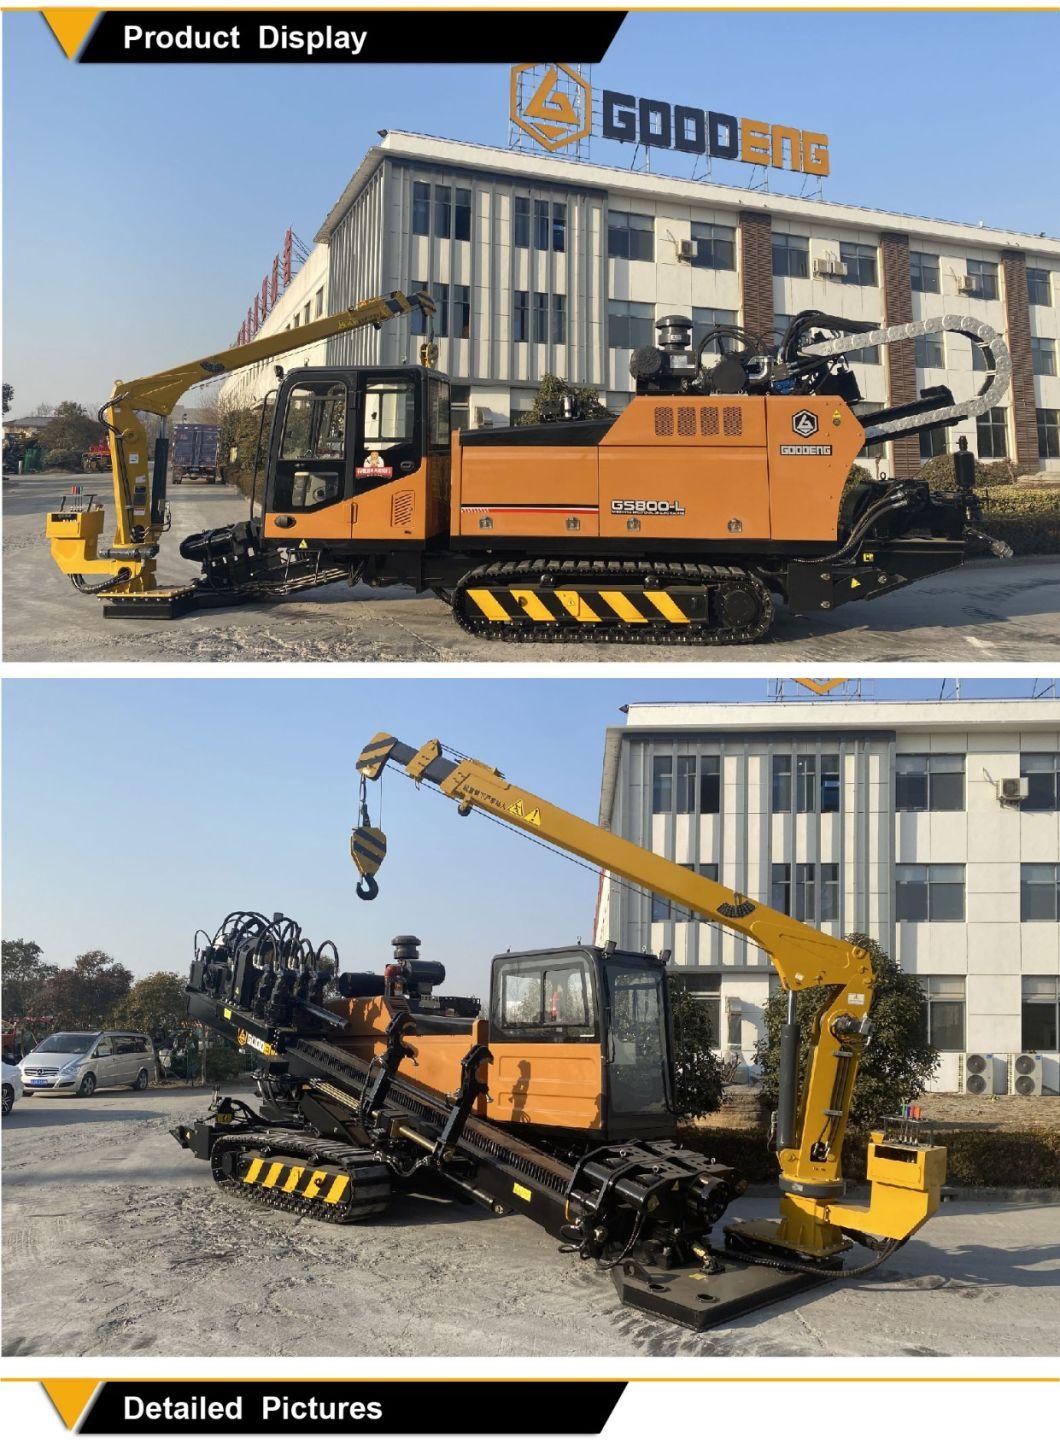 Goodeng 80 ton Low Maintenance Cost hdd rig